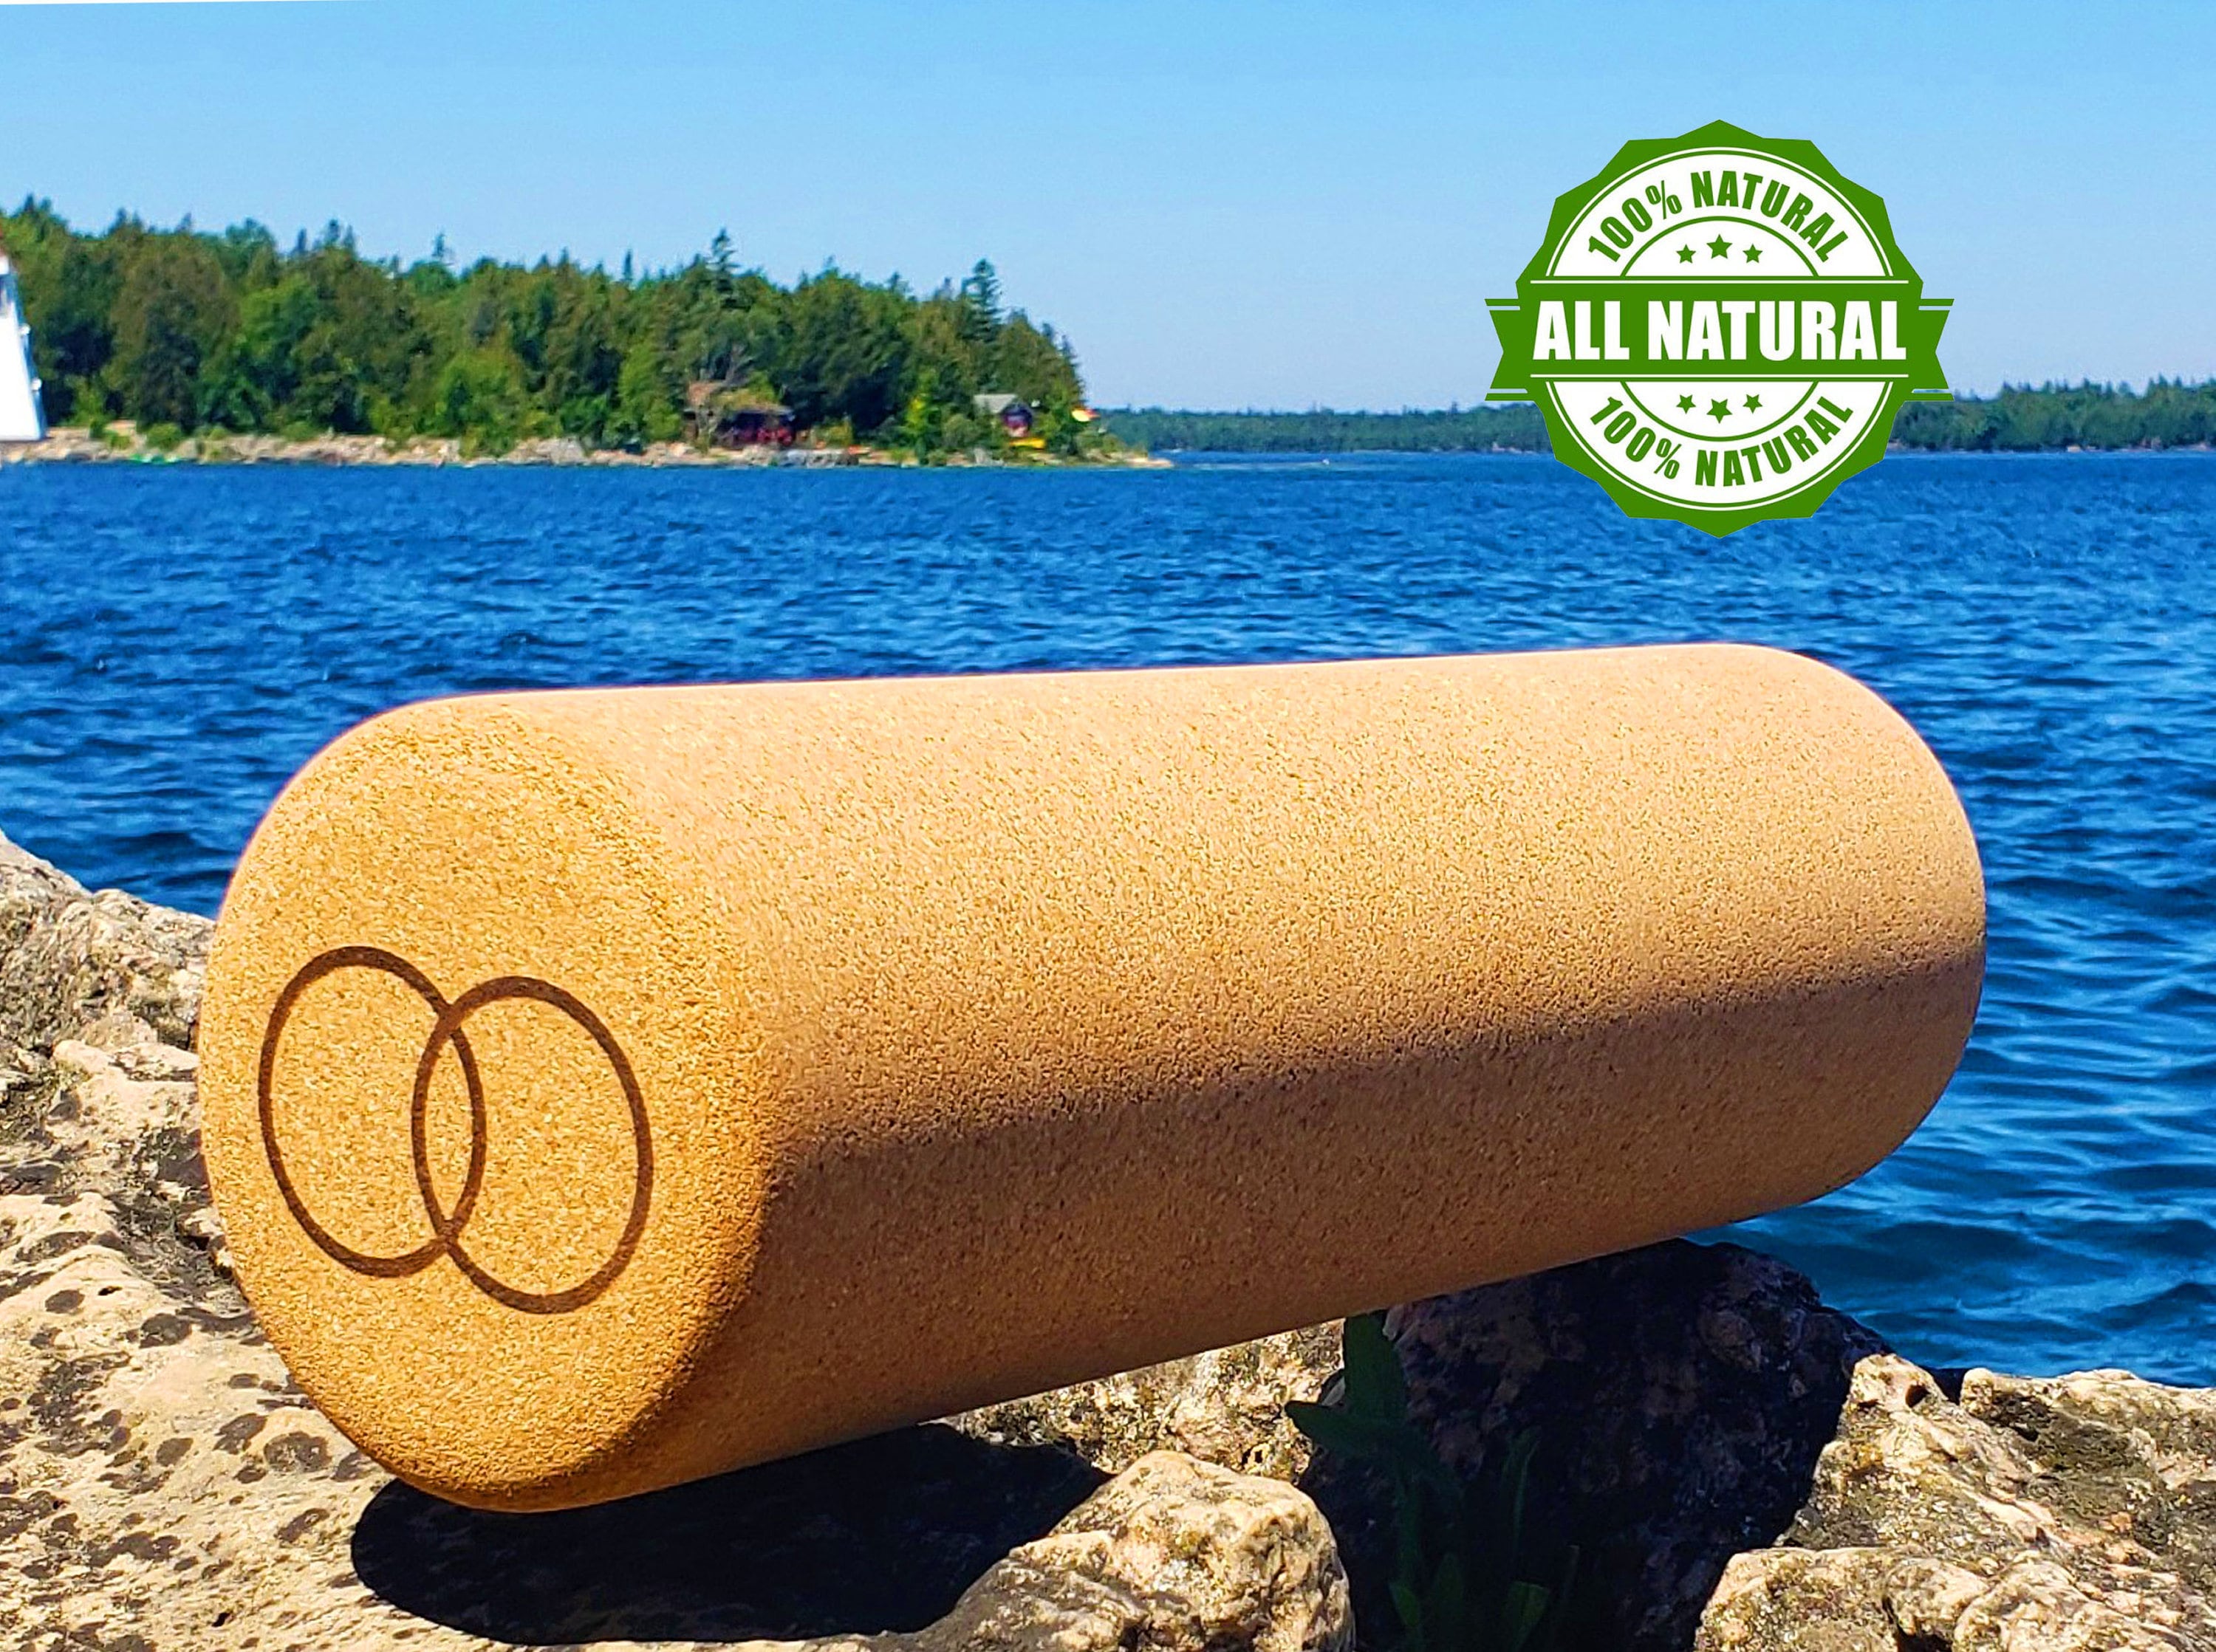 100% All-Natural Spanish Cork Orbsoul Cork Massage Roller for Muscle Pain and Tension Relief FREE SHIPPING Eco-Friendly Long 13 inch